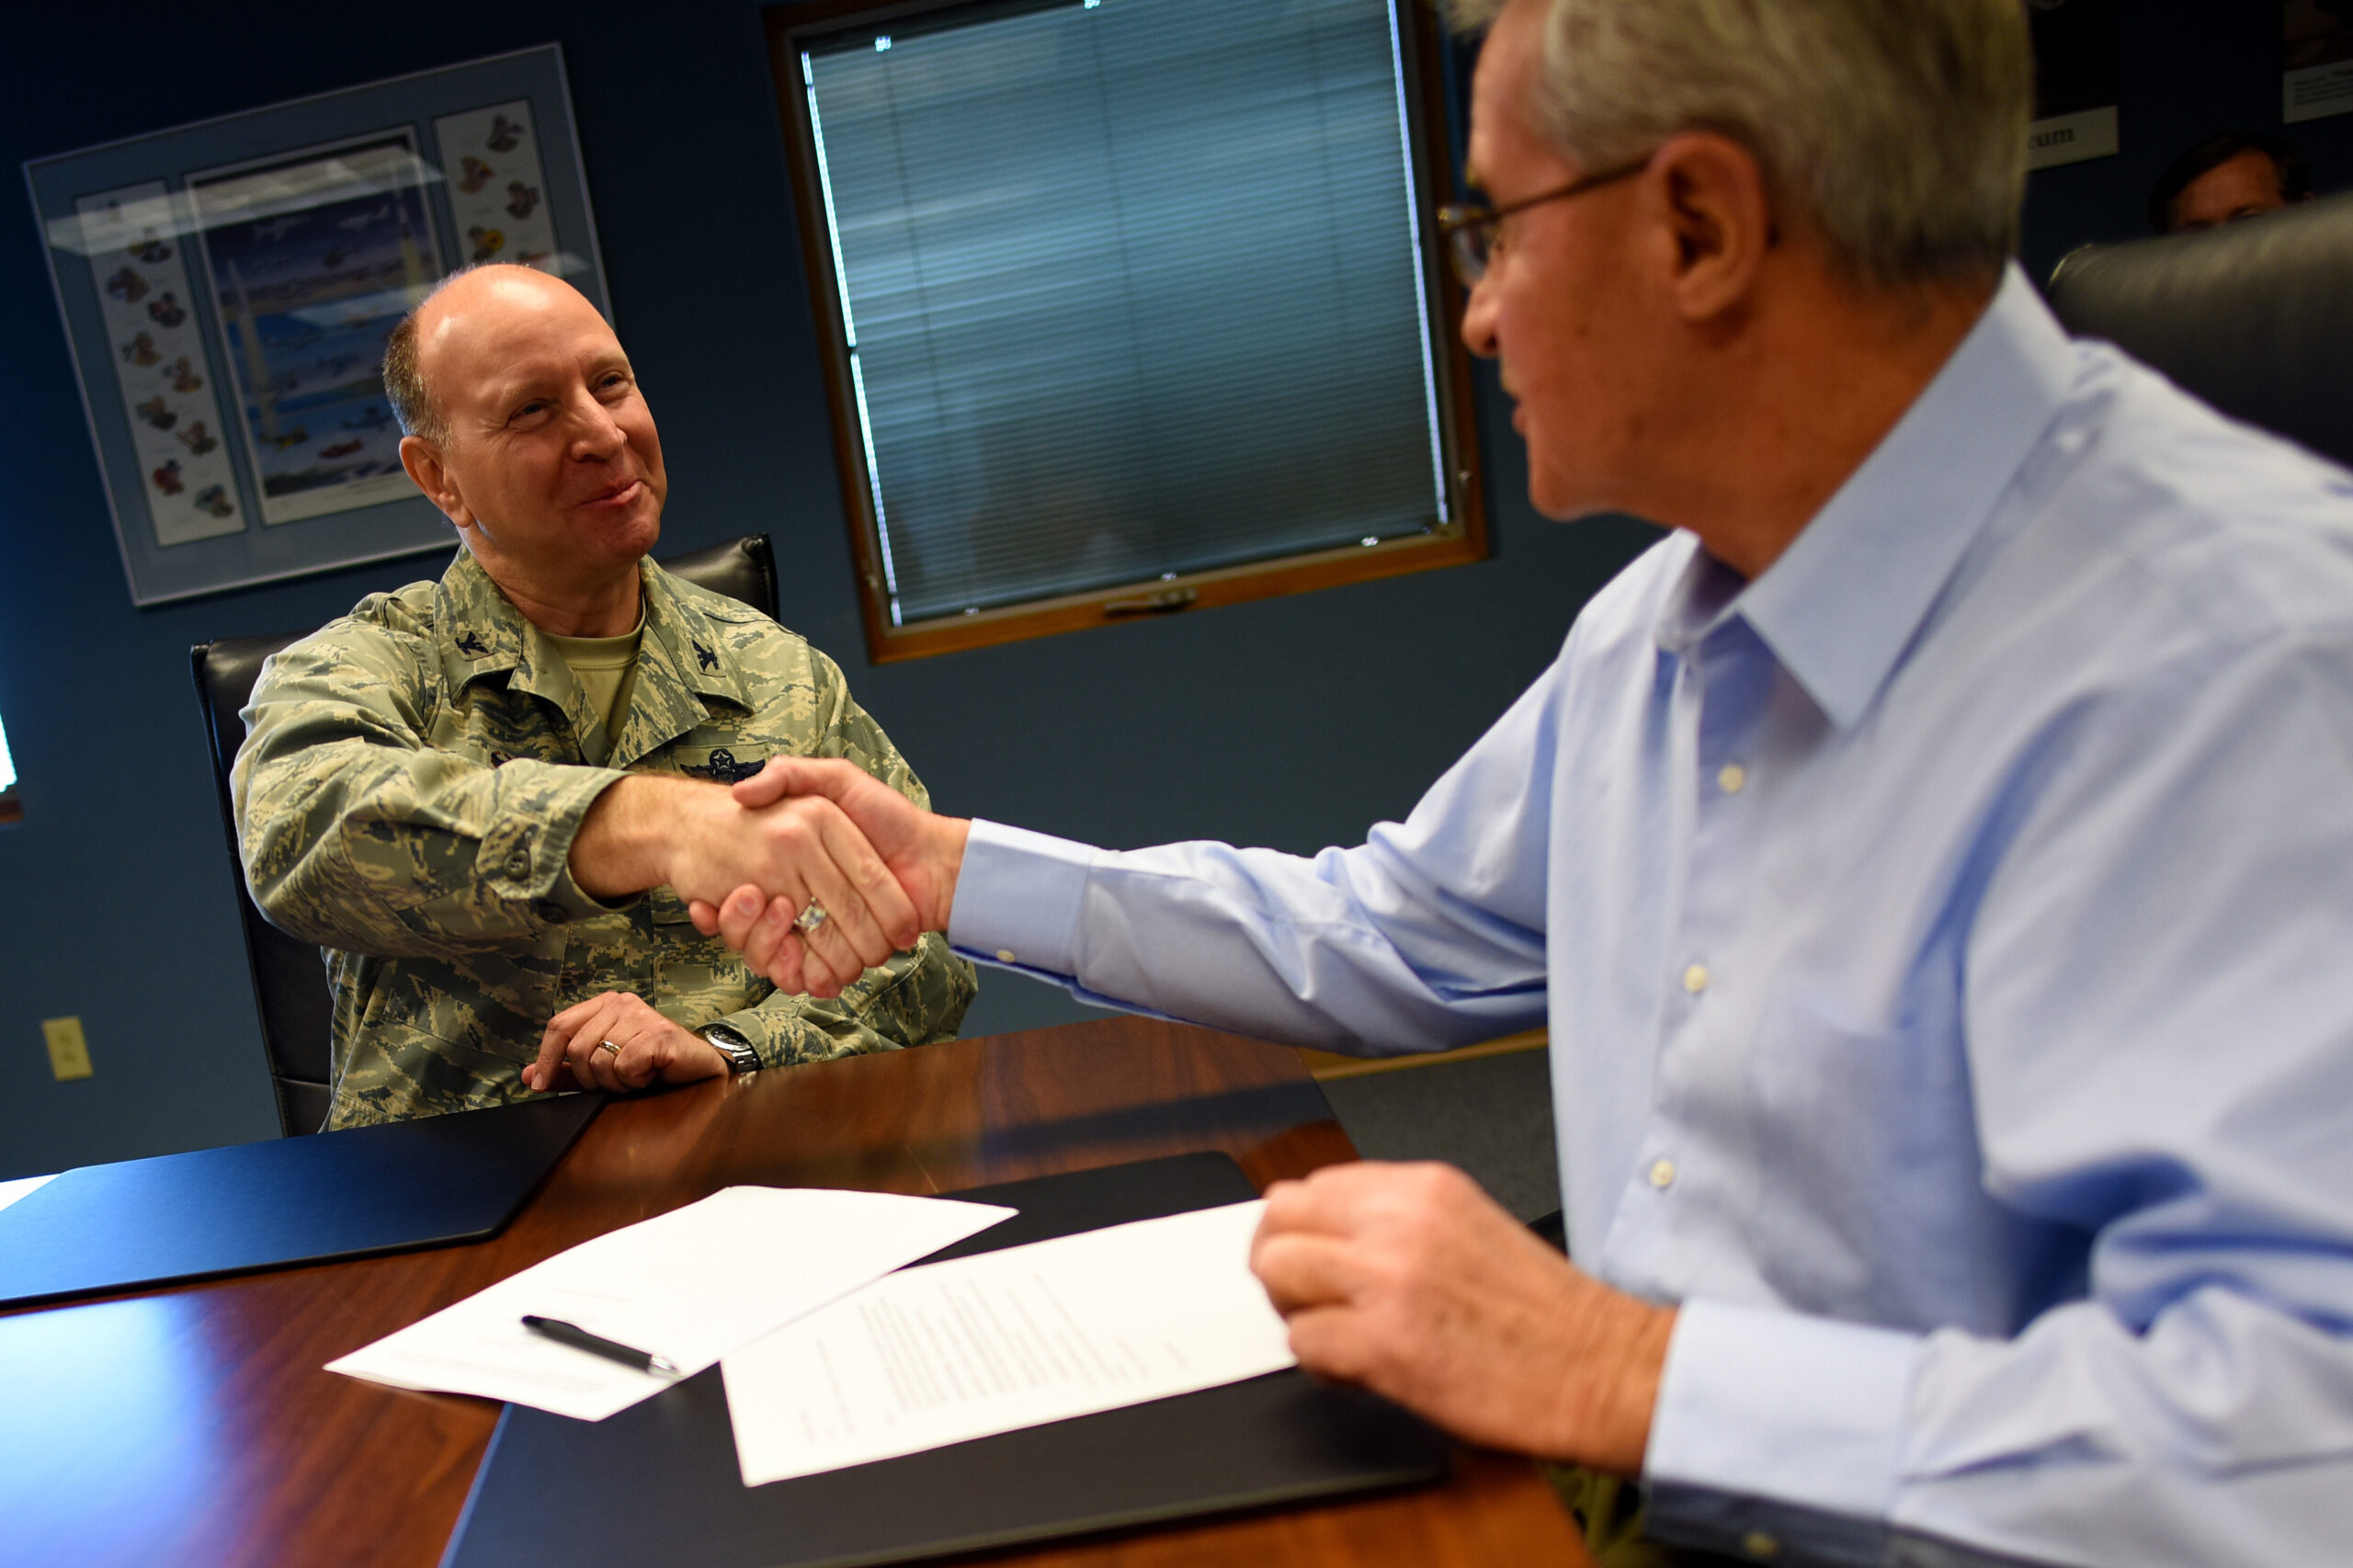 A man in U.S. Air Force uniform shakes hands across a table with a man in a blue button-up shirt.